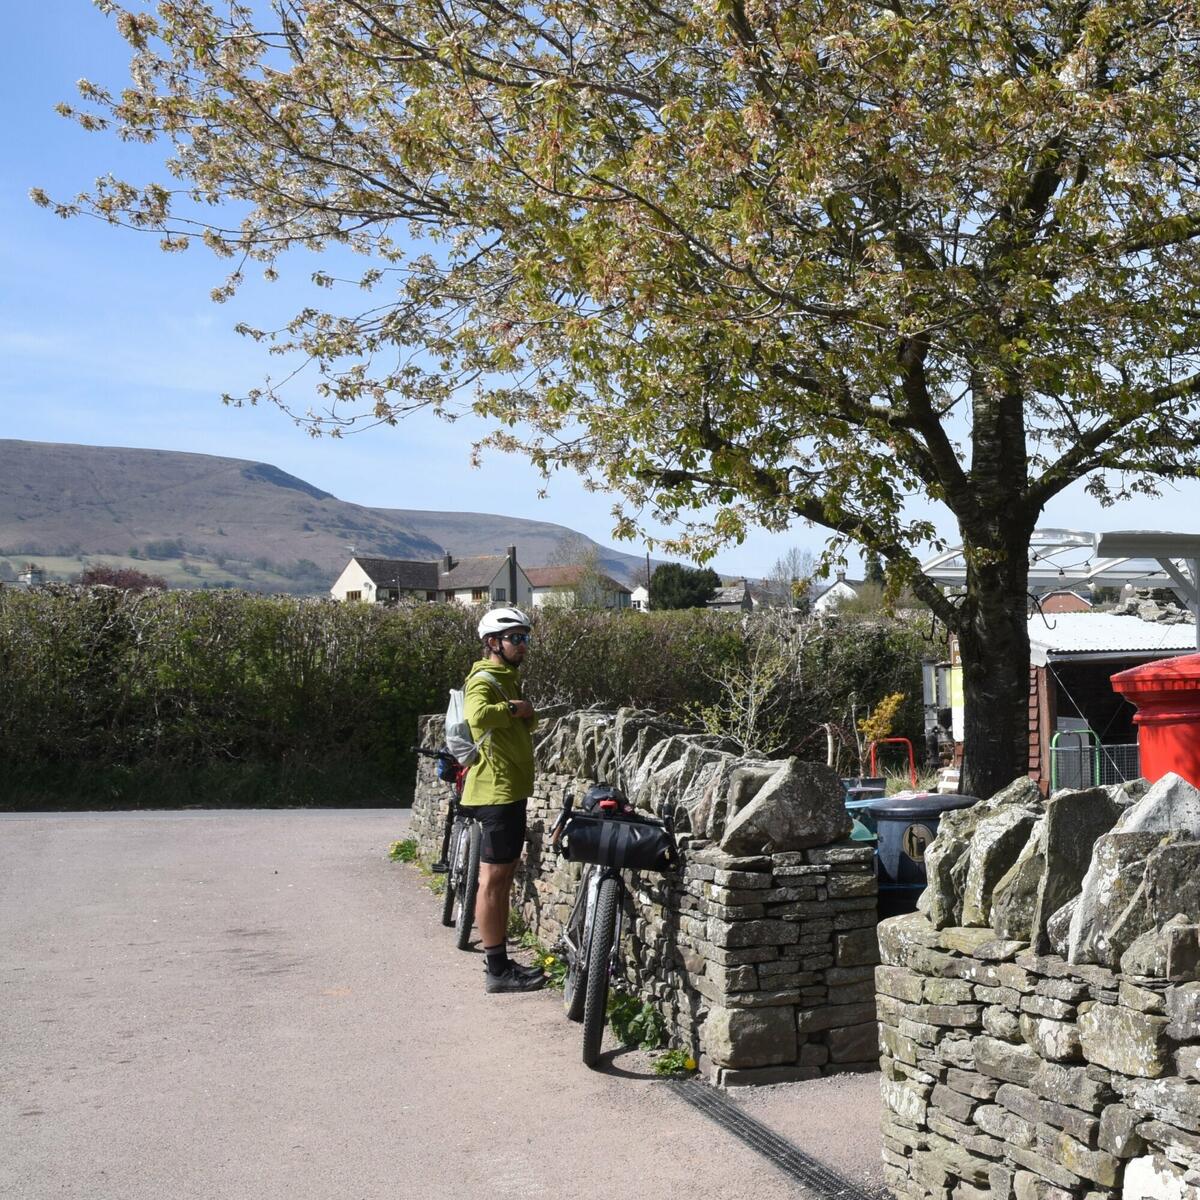 Cyclists stopping off for coffee prior to Hay on Wye